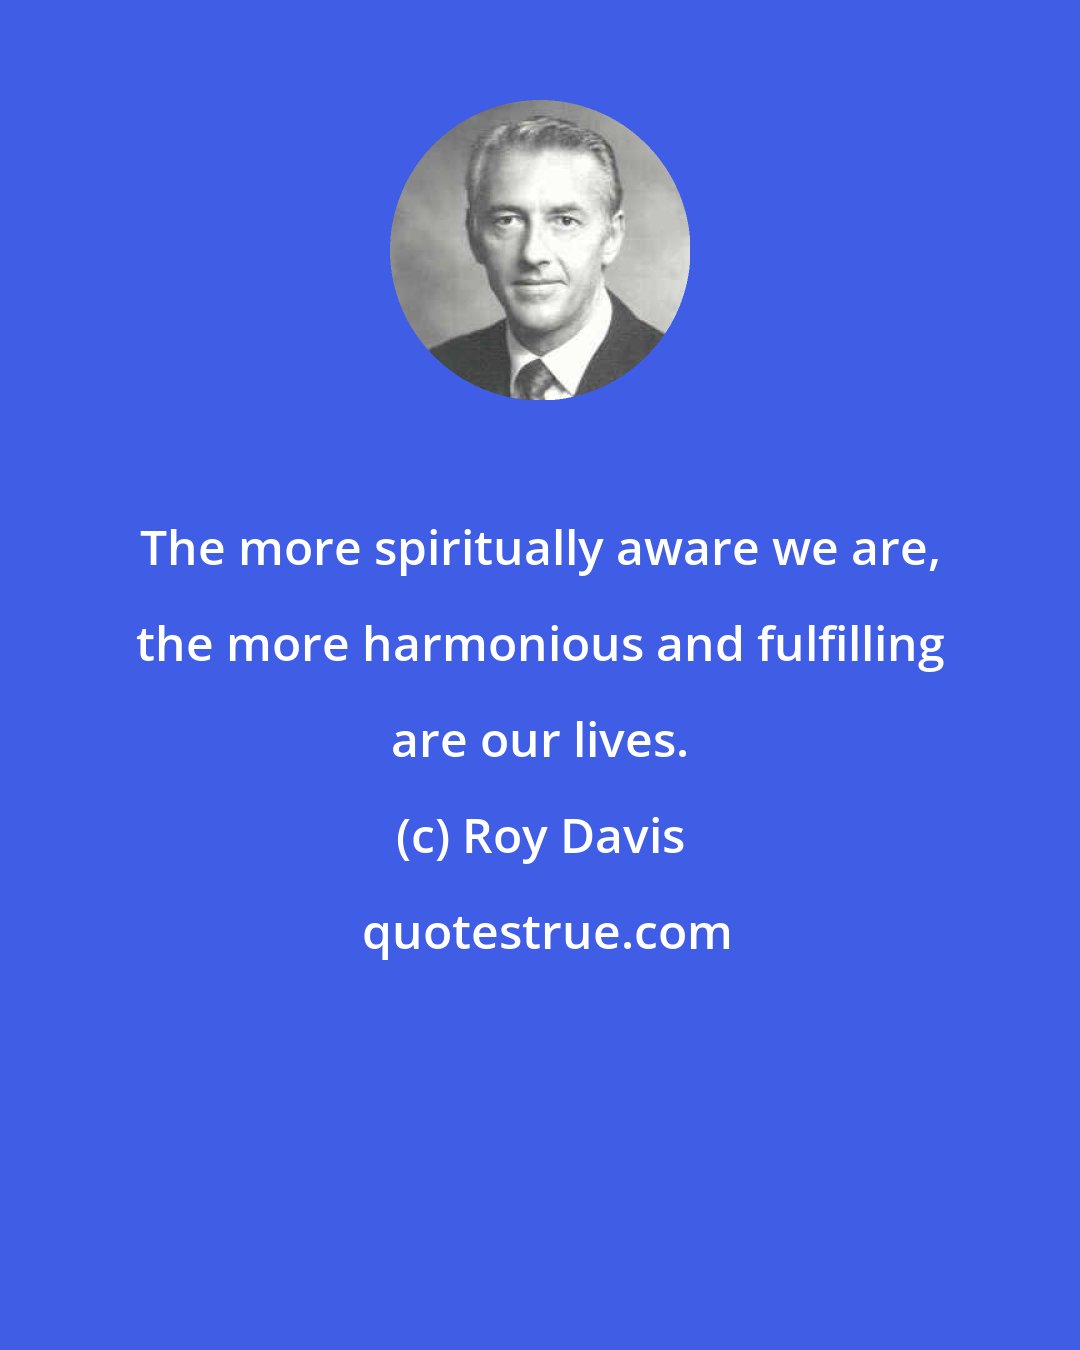 Roy Davis: The more spiritually aware we are, the more harmonious and fulfilling are our lives.